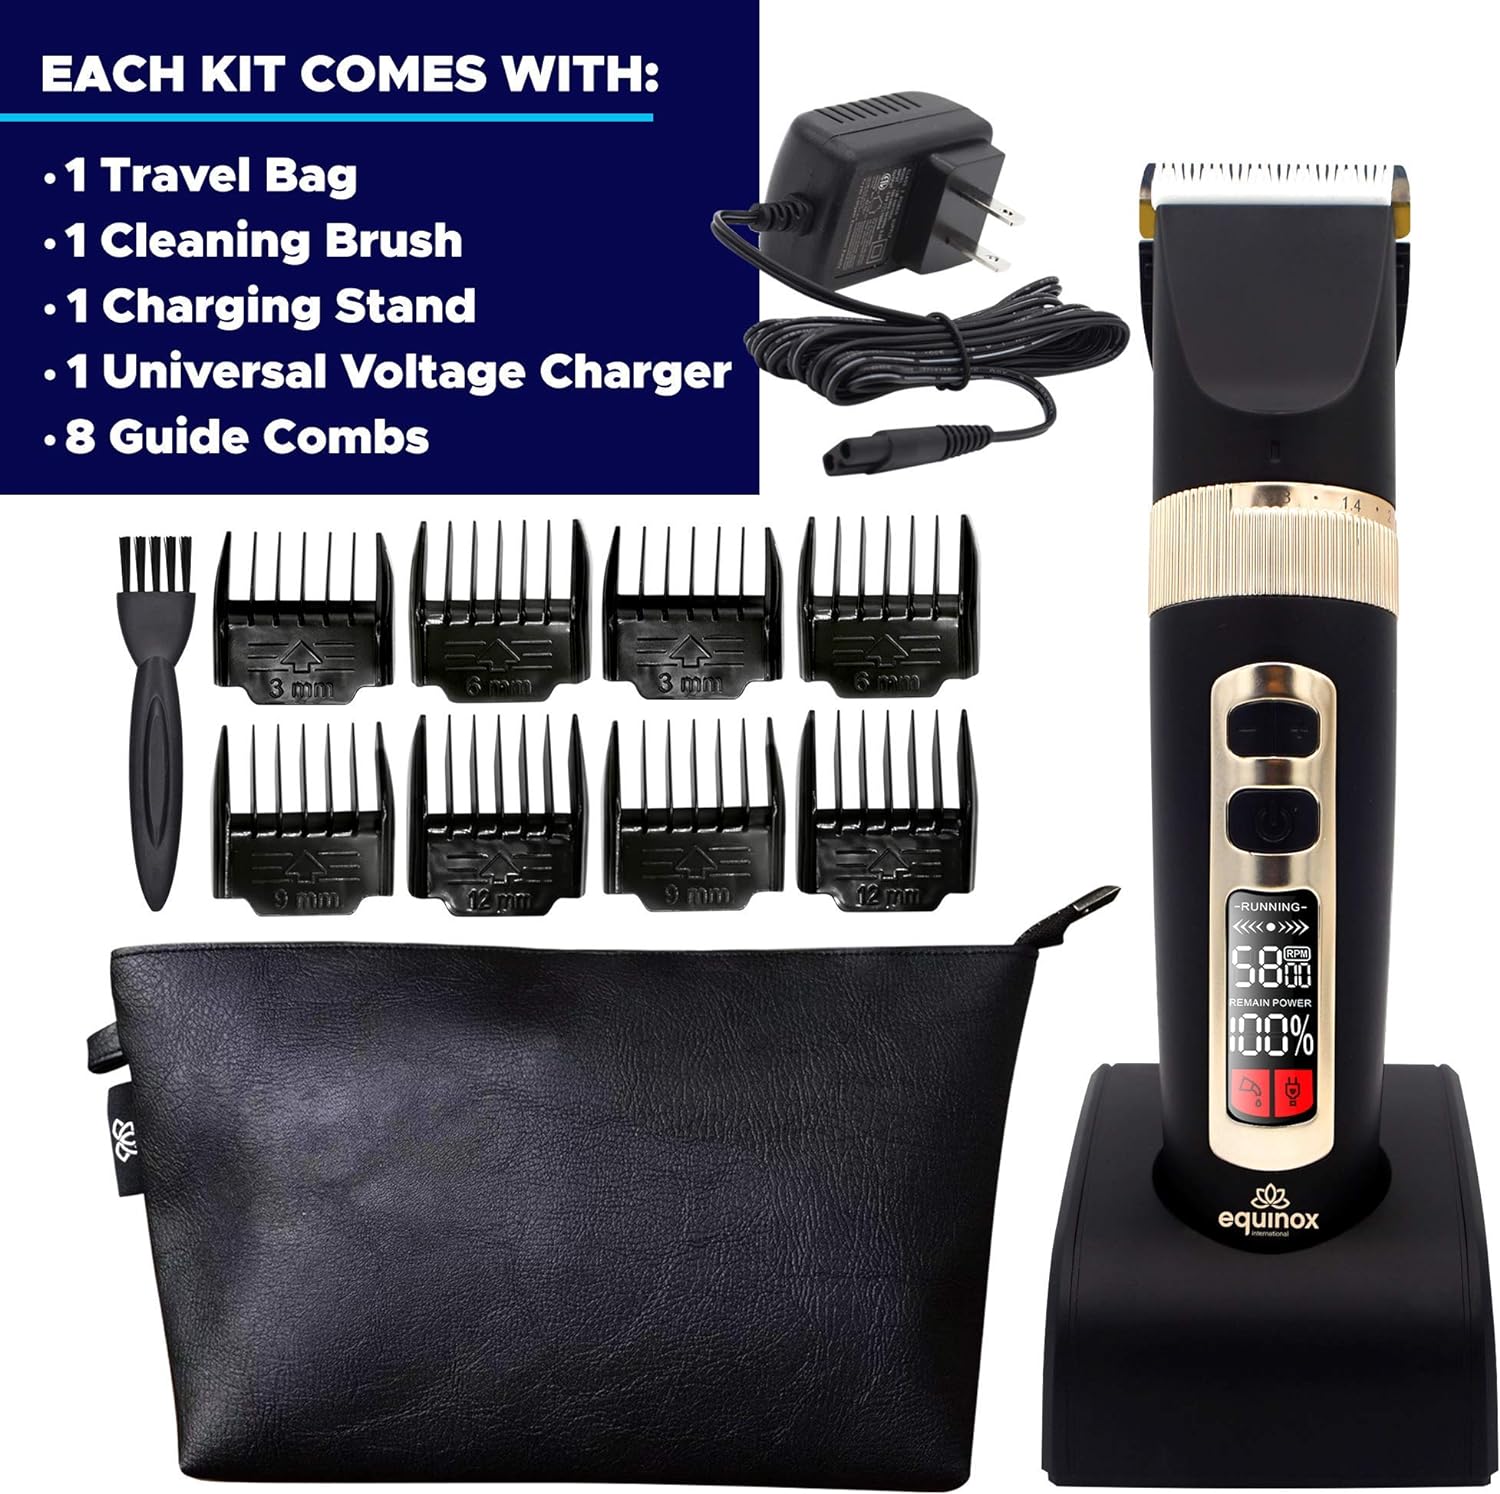 Equinox International Waterproof Cordless Rechargeable Beard & Hair Trimmer with 8 Guards